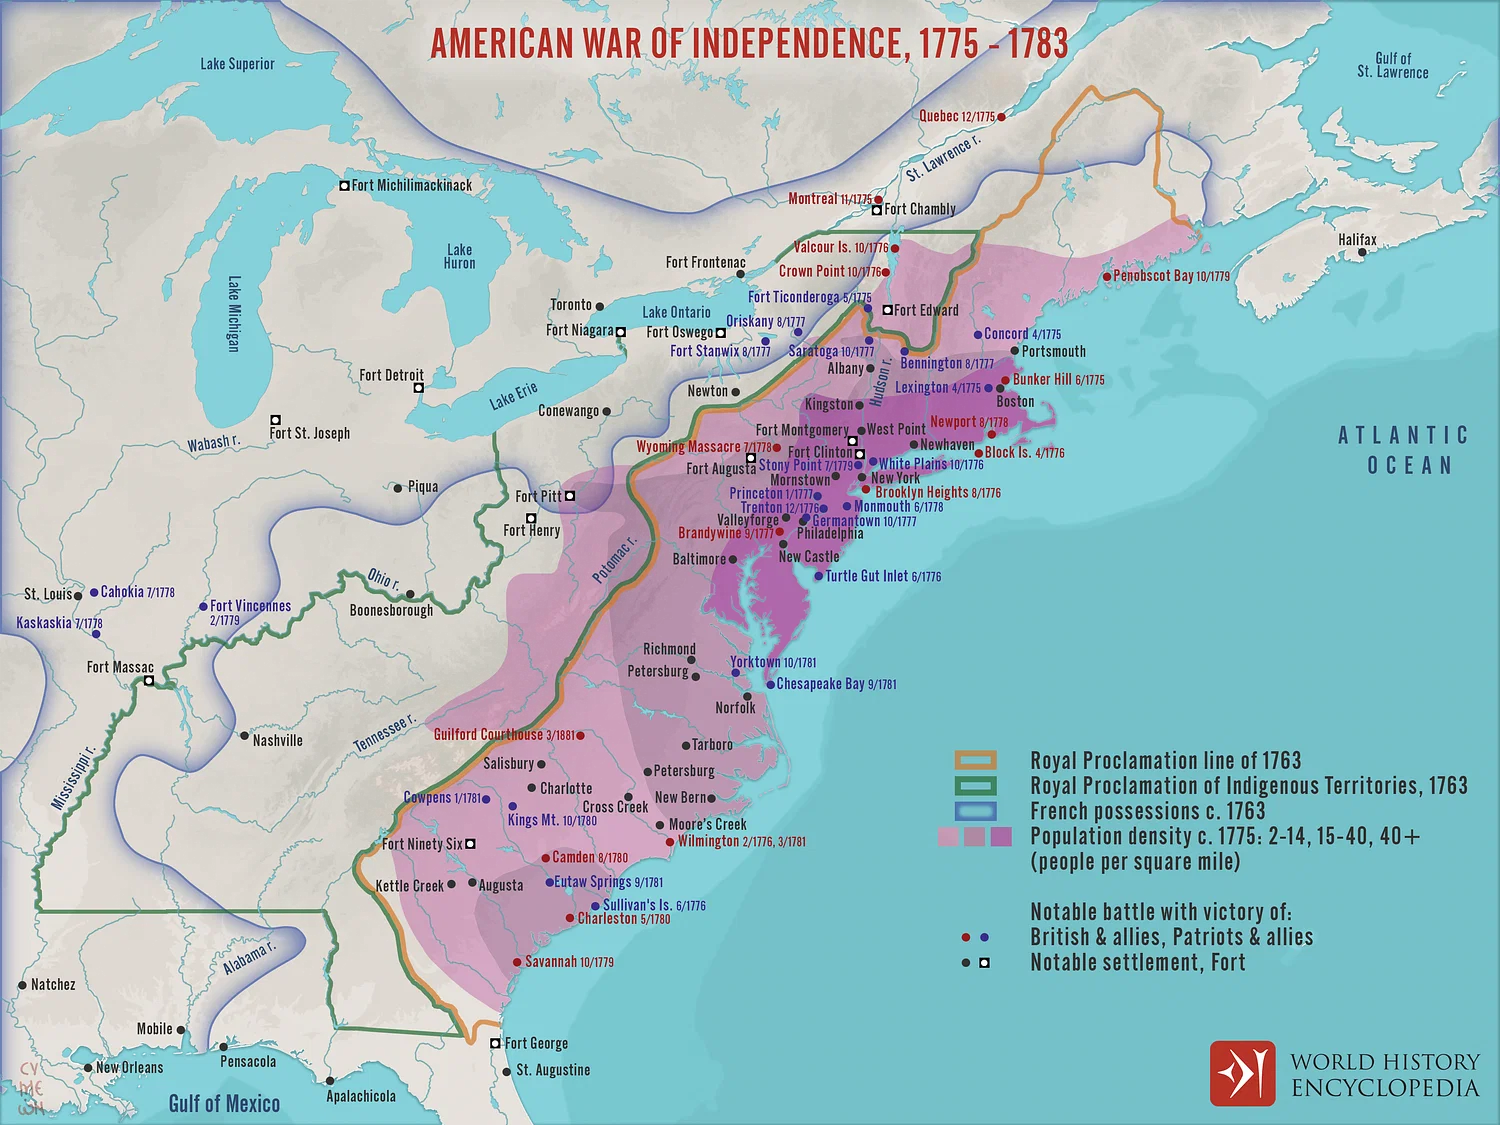  13 original colonies that declared independence from Great Britain in 1776